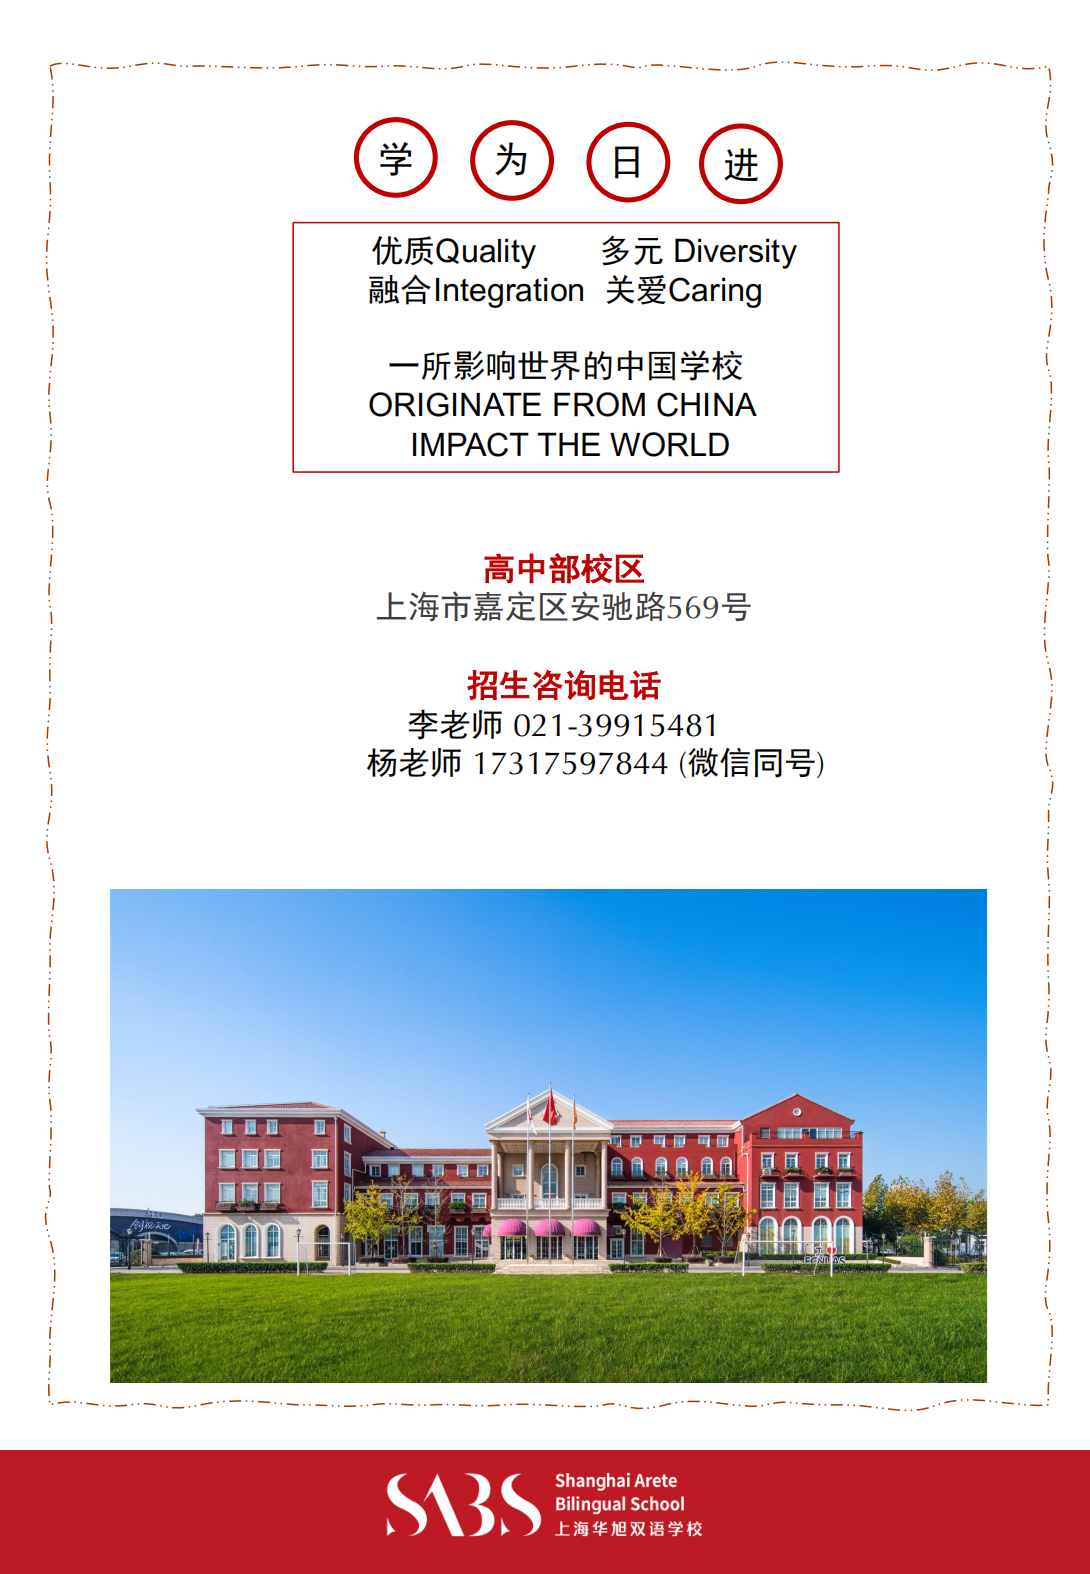 HS 7th Issue Newsletter pptx（English)_11.png